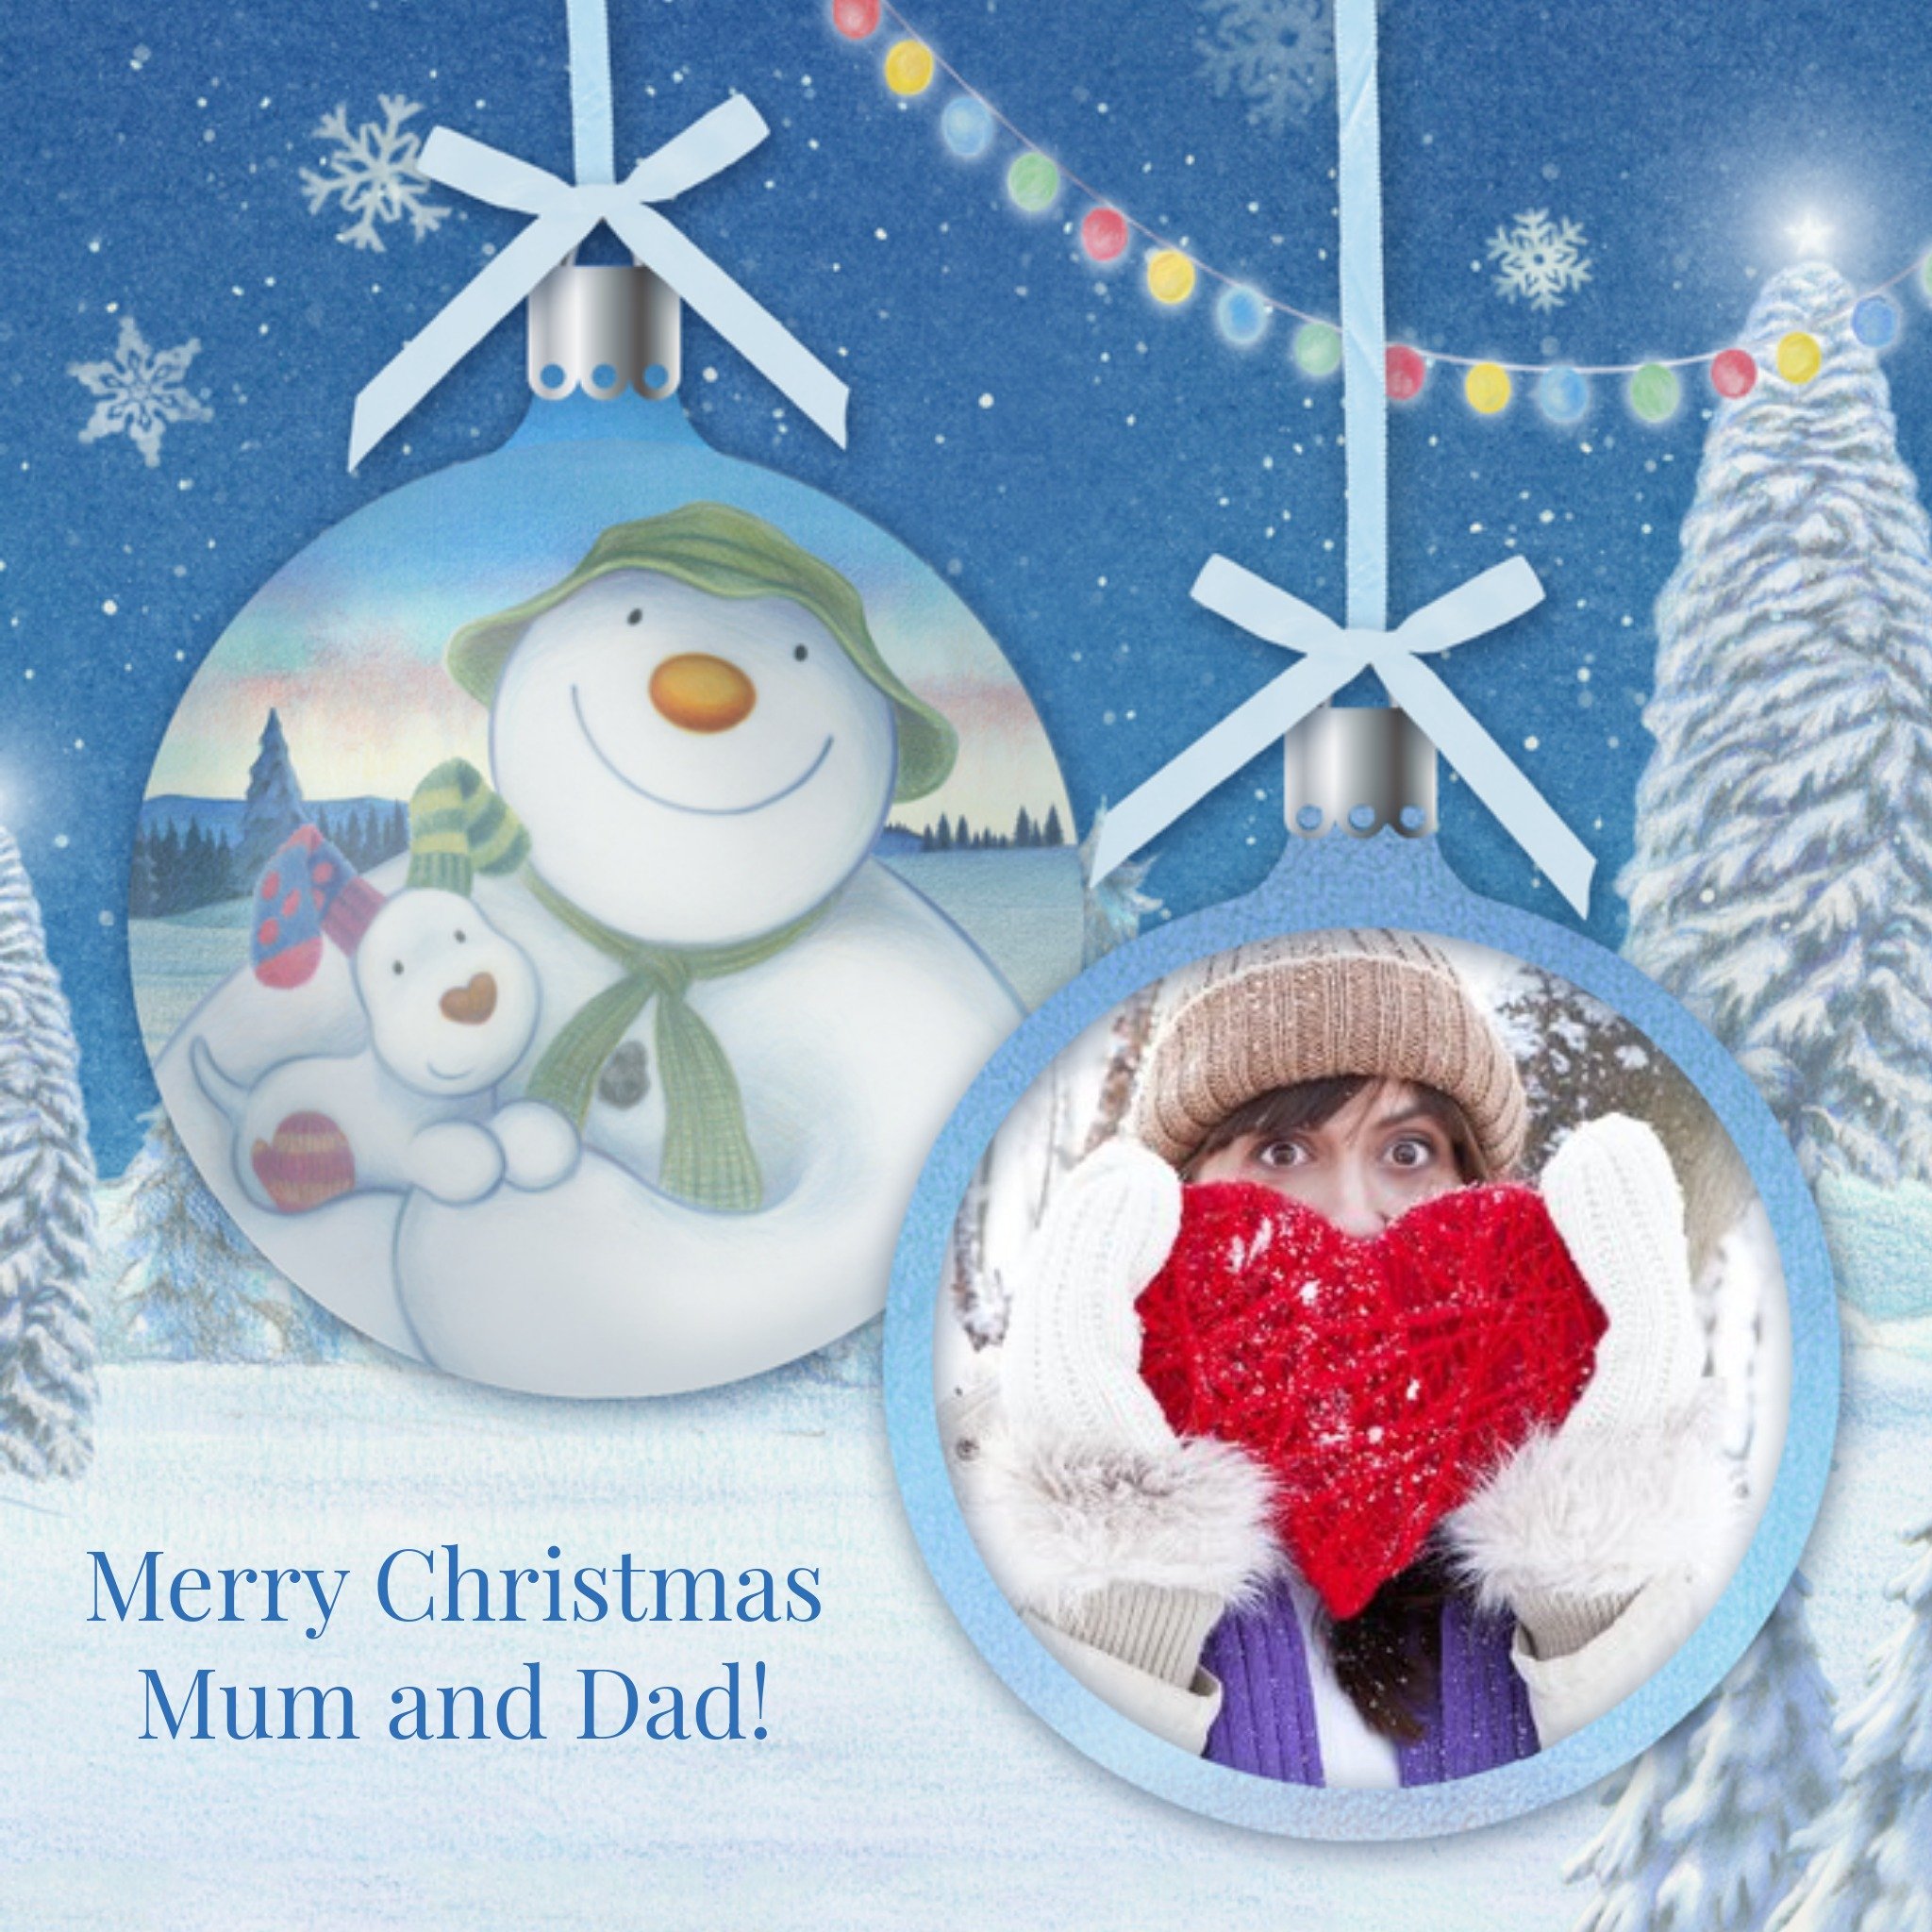 The Snowman Winter Wonderland Scenery With Photo Upload Bauble Christmas Card, Large